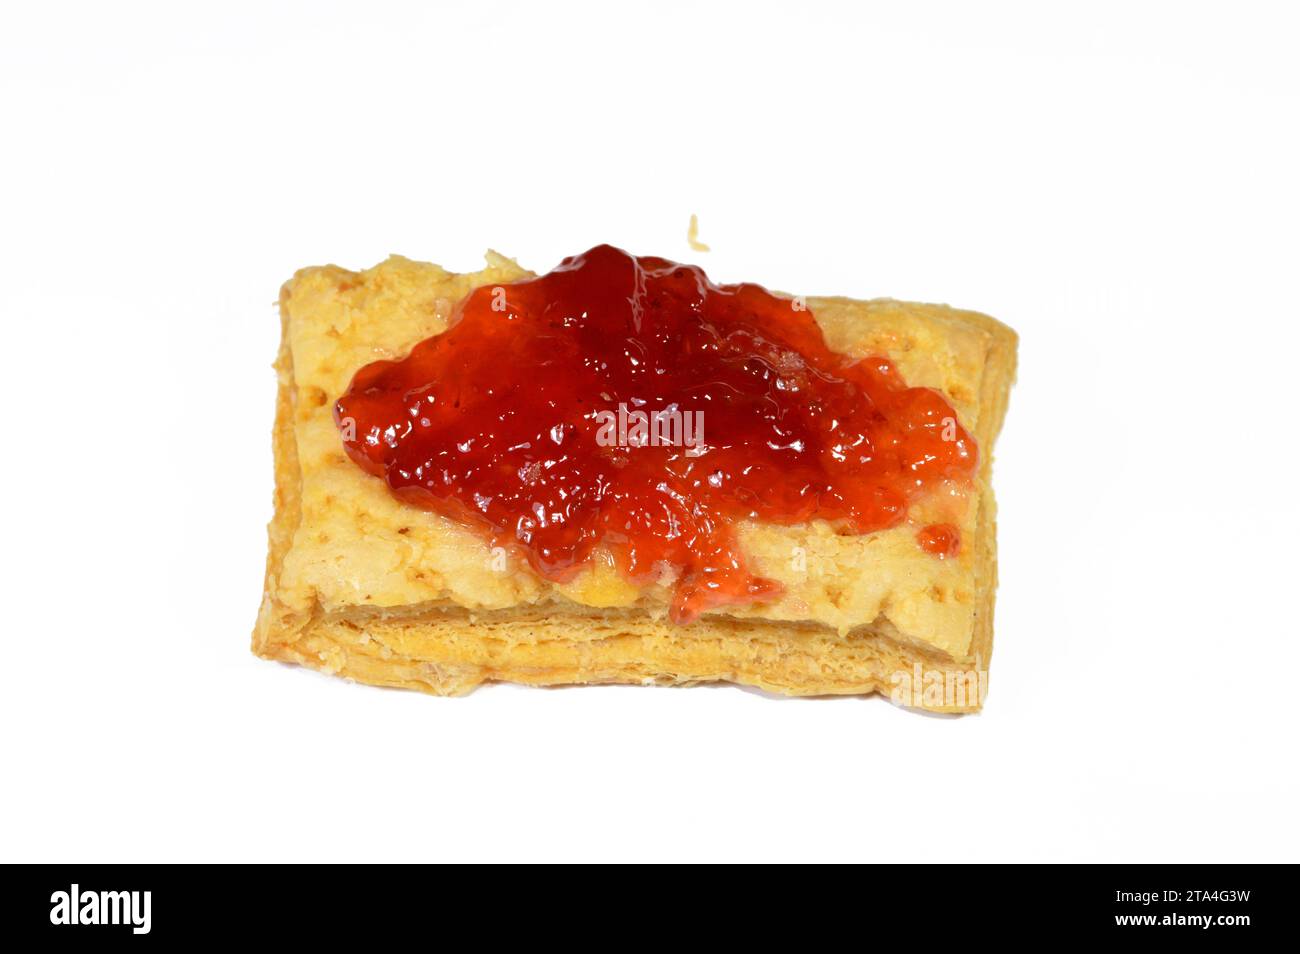 mille-feuille, millefeuille, Napoleon, vanilla and custard slice topped and covered with strawberry jam, a French dessert made of puff pastry layered Stock Photo